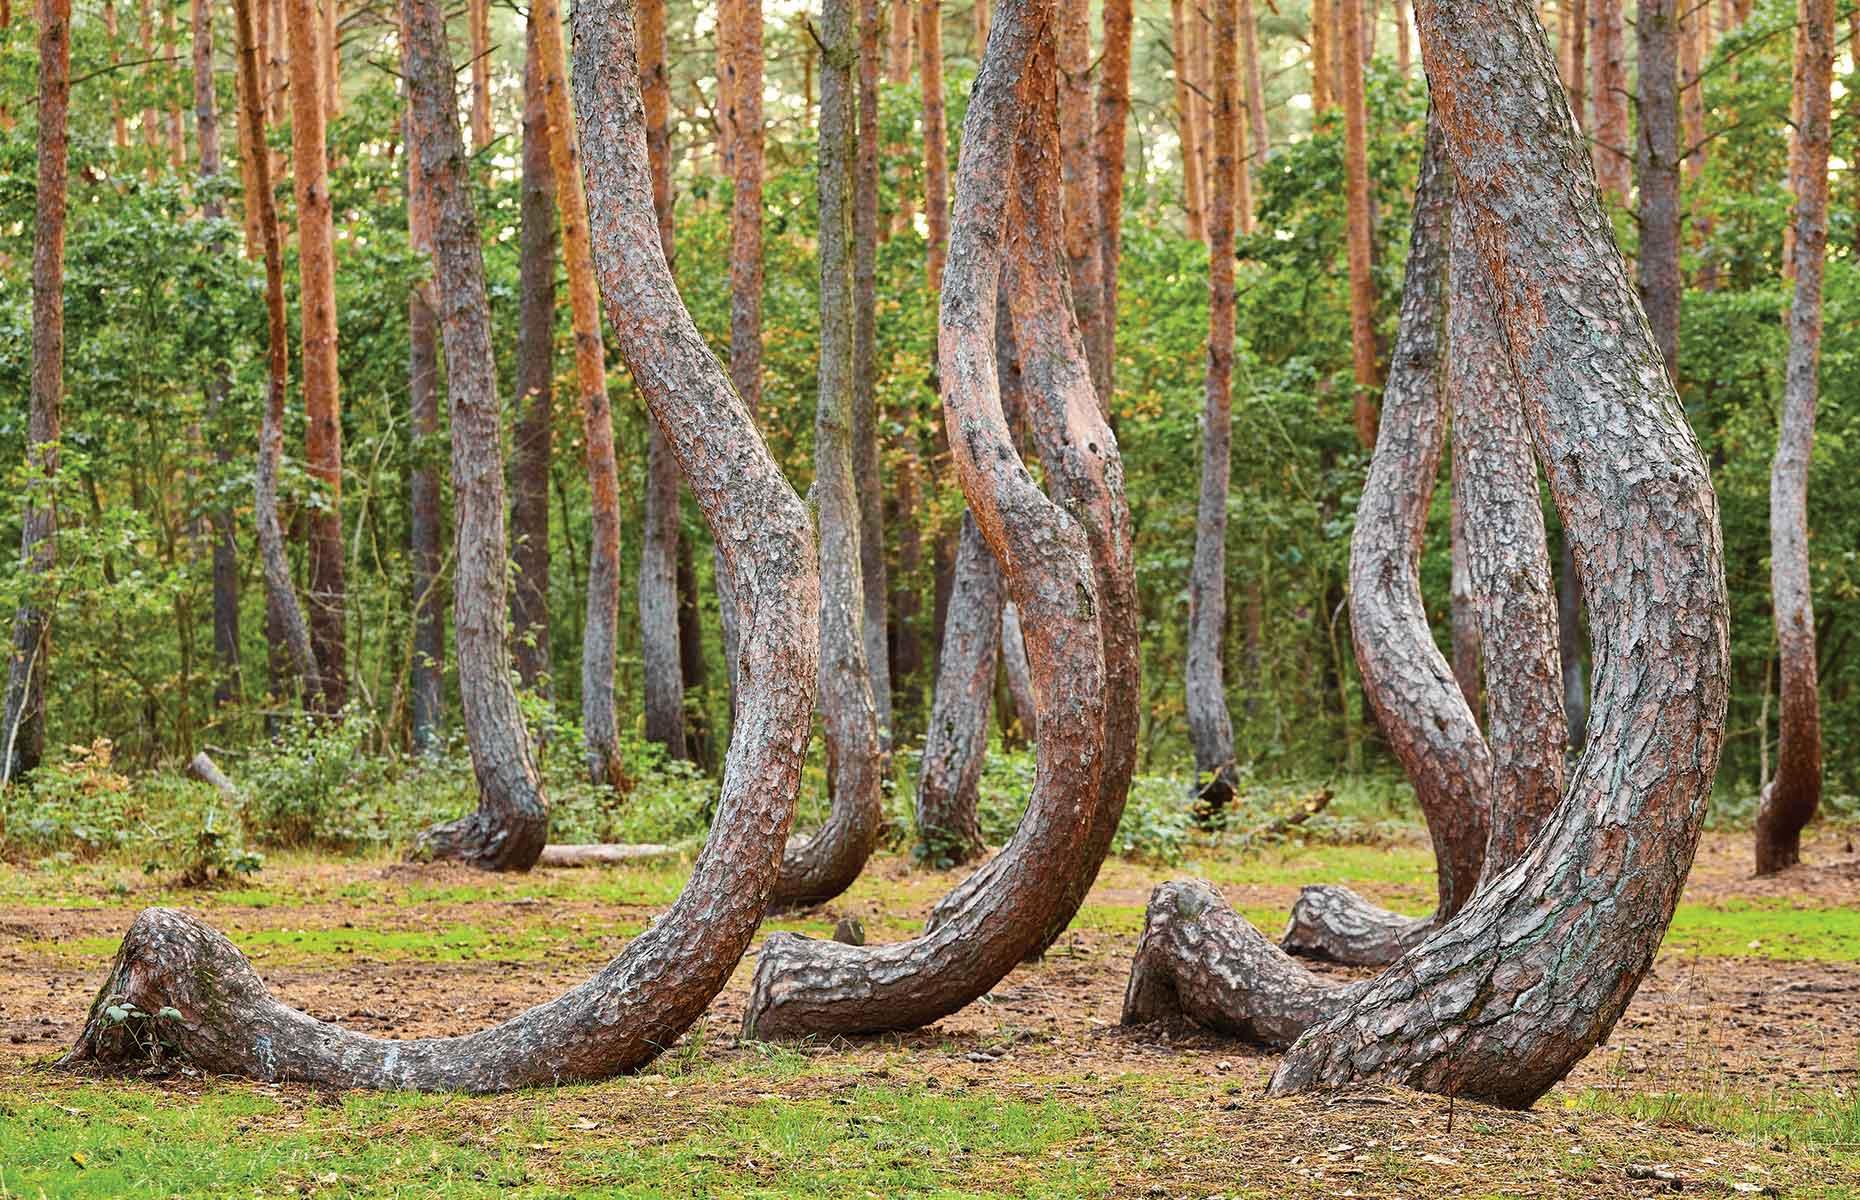 <p>It's not known why the 400 pine trees in this grove bend in such a curious way. The forest was planted in around 1930 and it's been suggested that the trees were manipulated, perhaps because the wood would later be used in furniture or boatbuilding. But the mystery remains...</p>  <p><a href="https://www.loveexploring.com/gallerylist/134015/unexplained-world-natural-wonders-that-remain-a-mystery"><strong>More natural wonders that remain a mystery</strong></a></p>